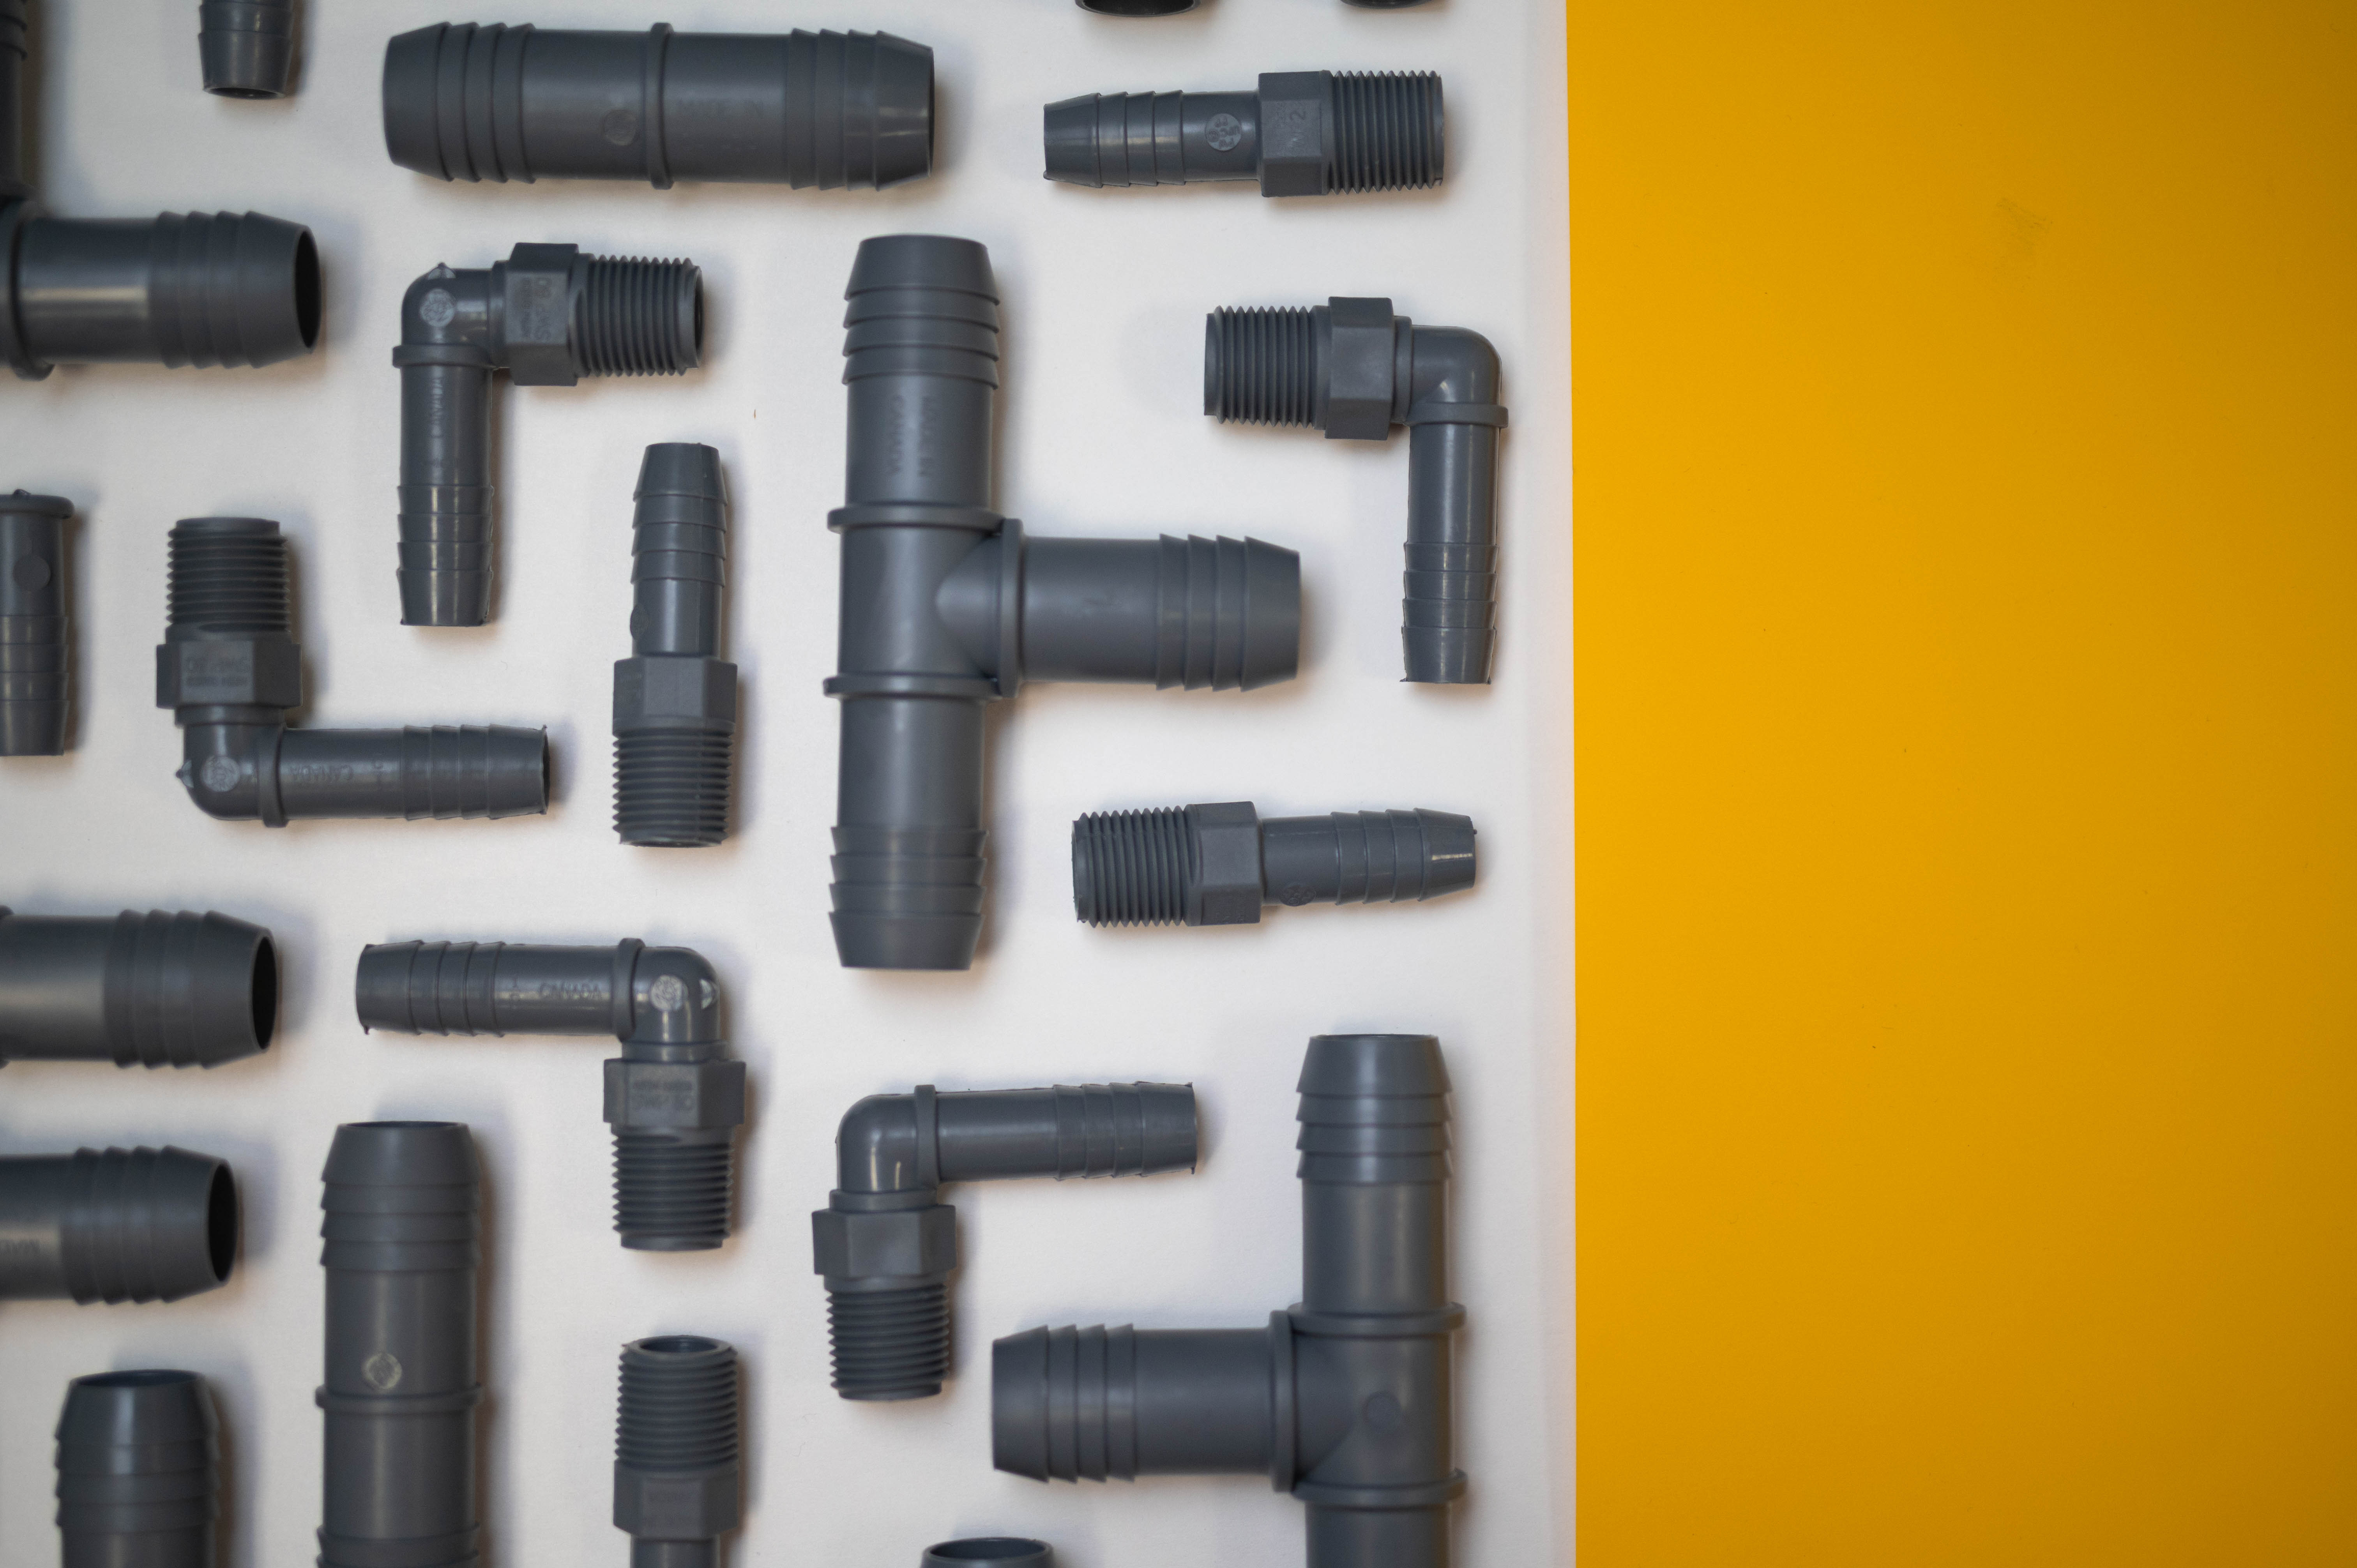 3 Do's and Don'ts when Assembling PVC Fittings